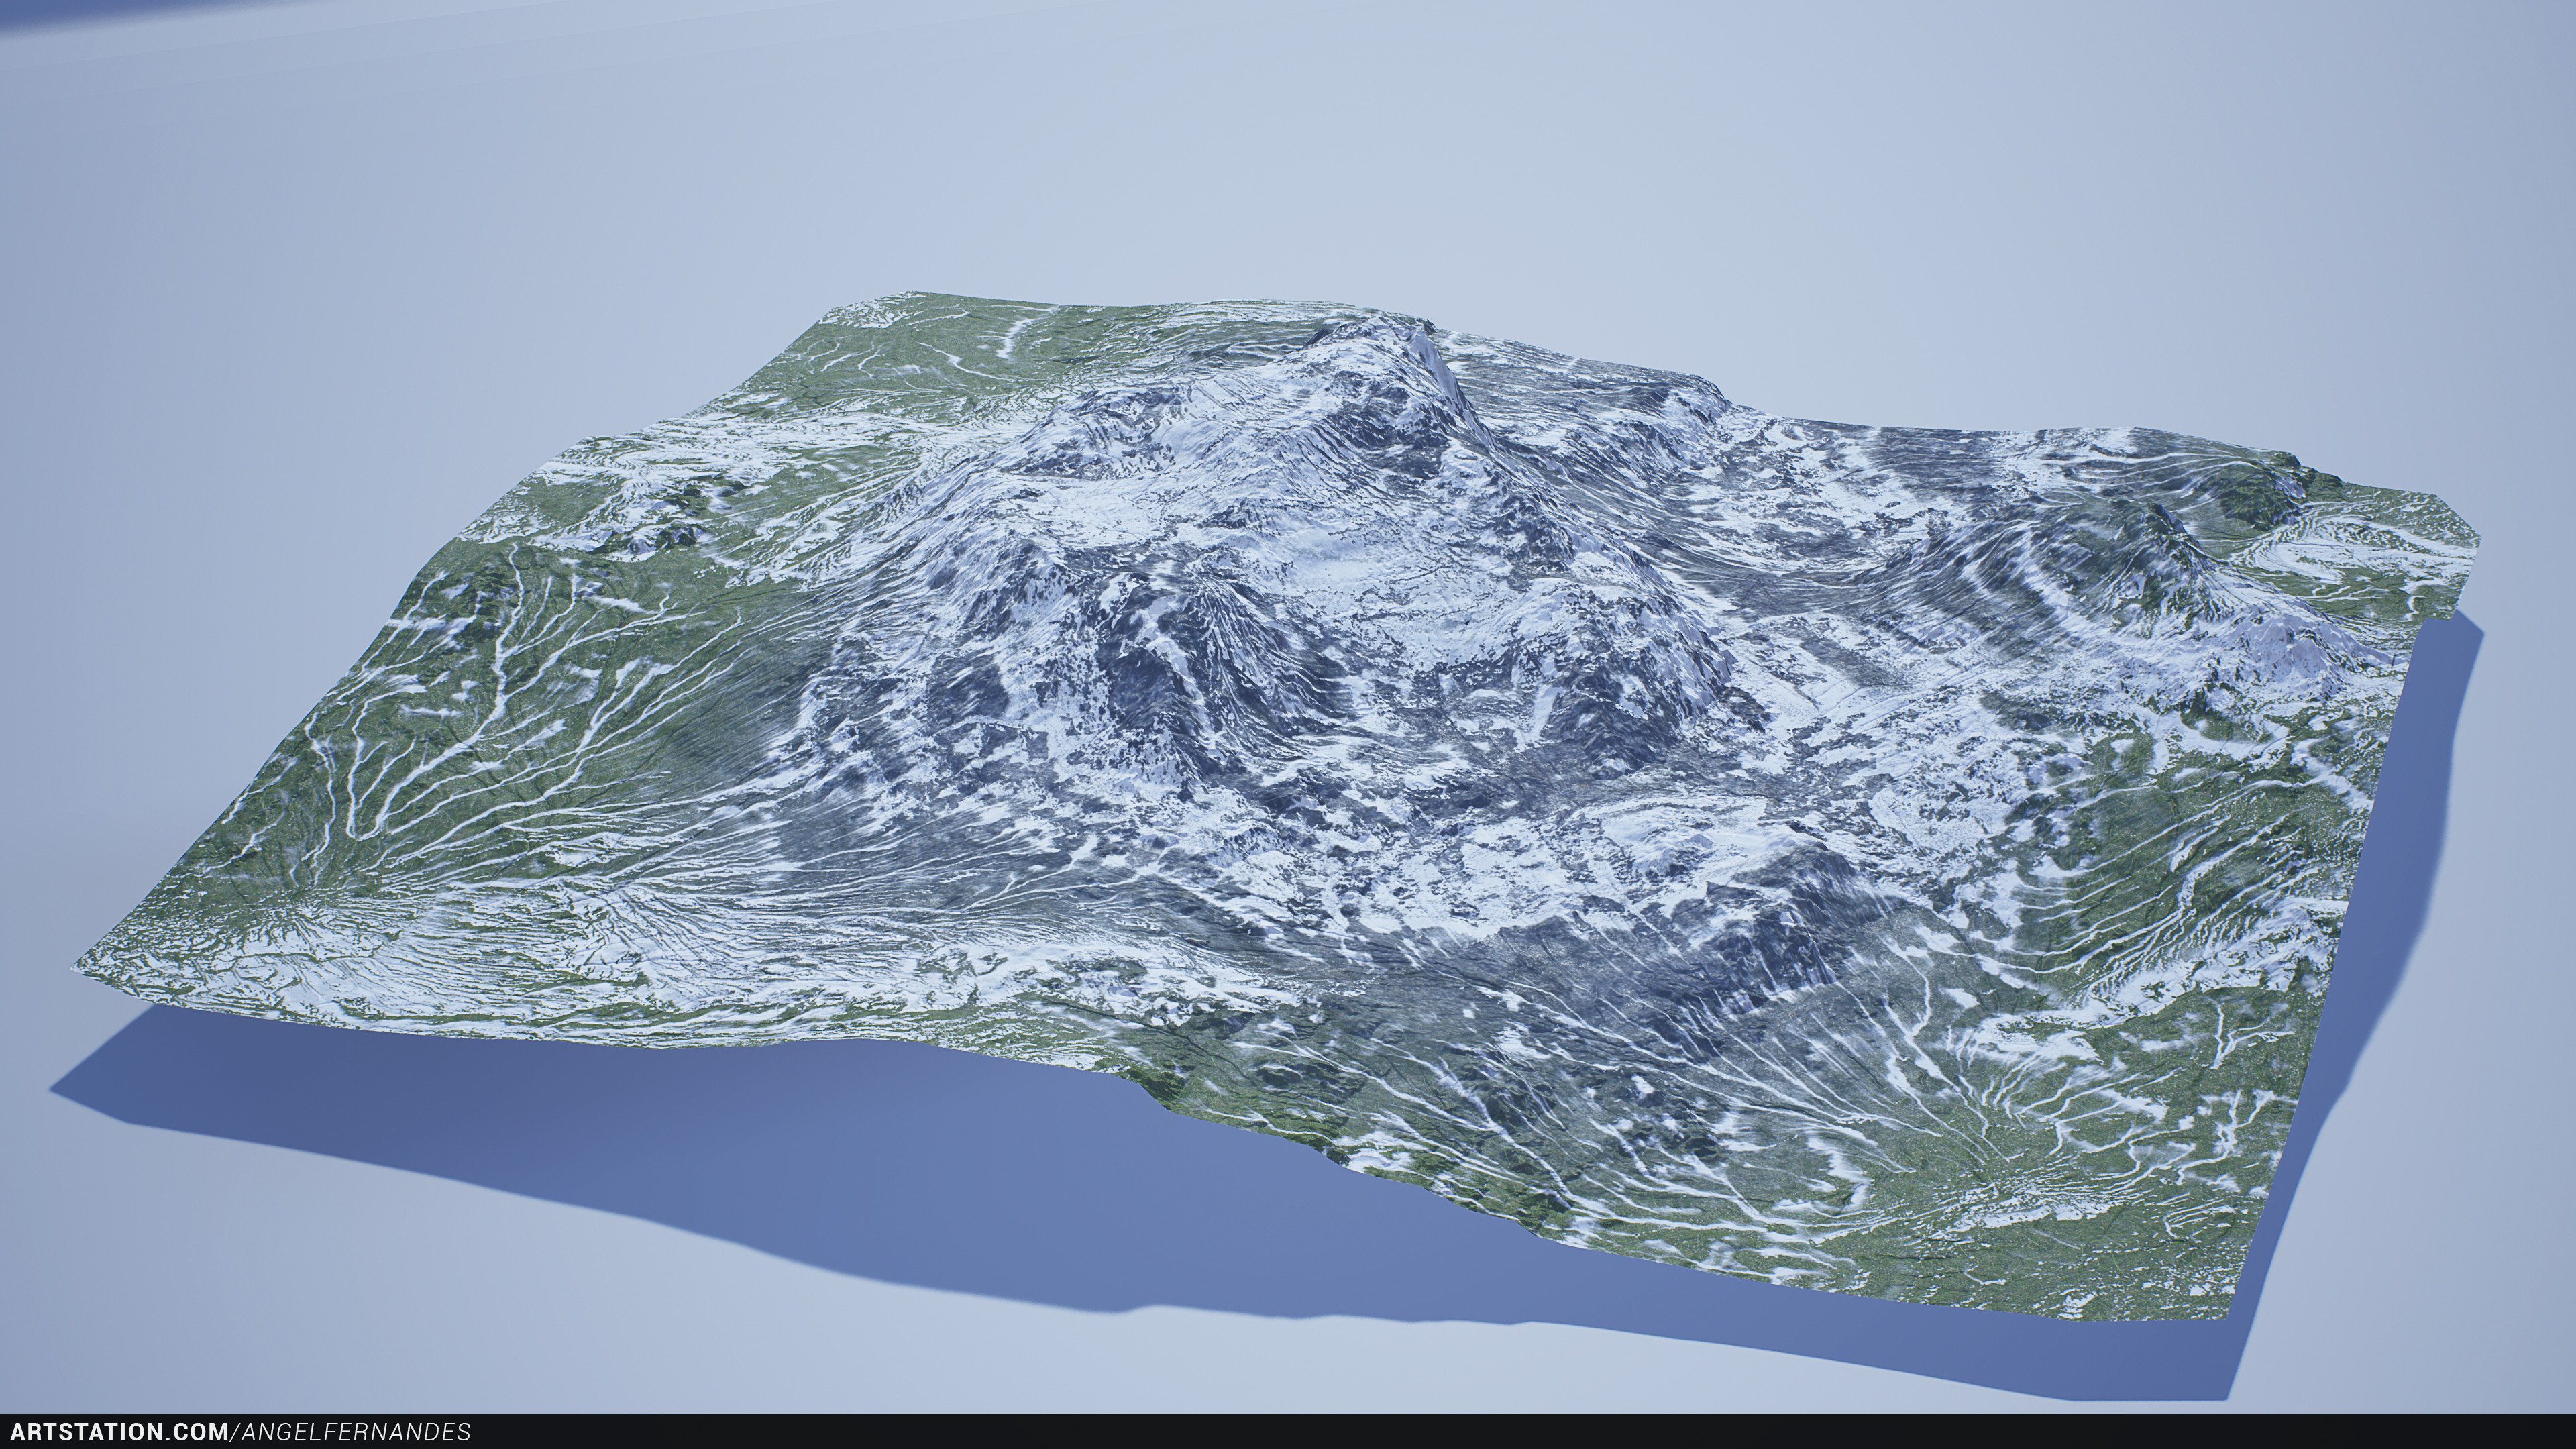 Background mountain I did in World Creator. Textured in SD.